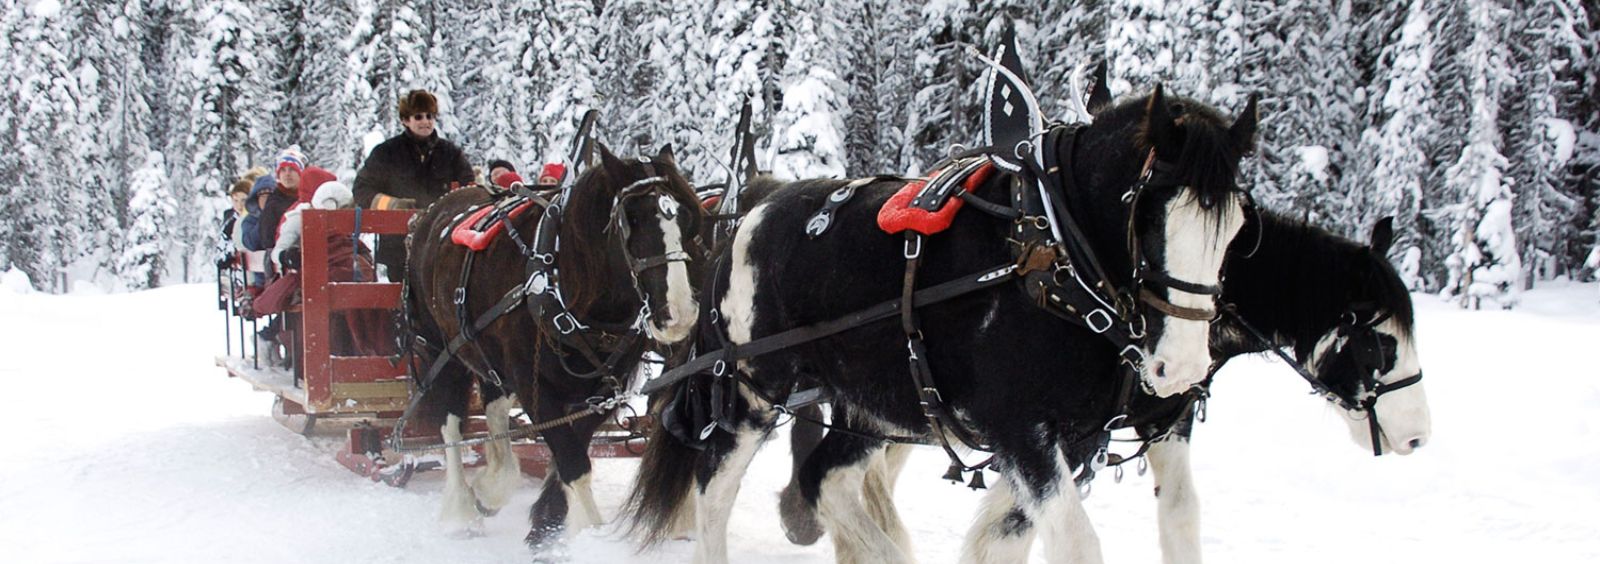 A horse-drawn wagon pulling a group of people through snow.